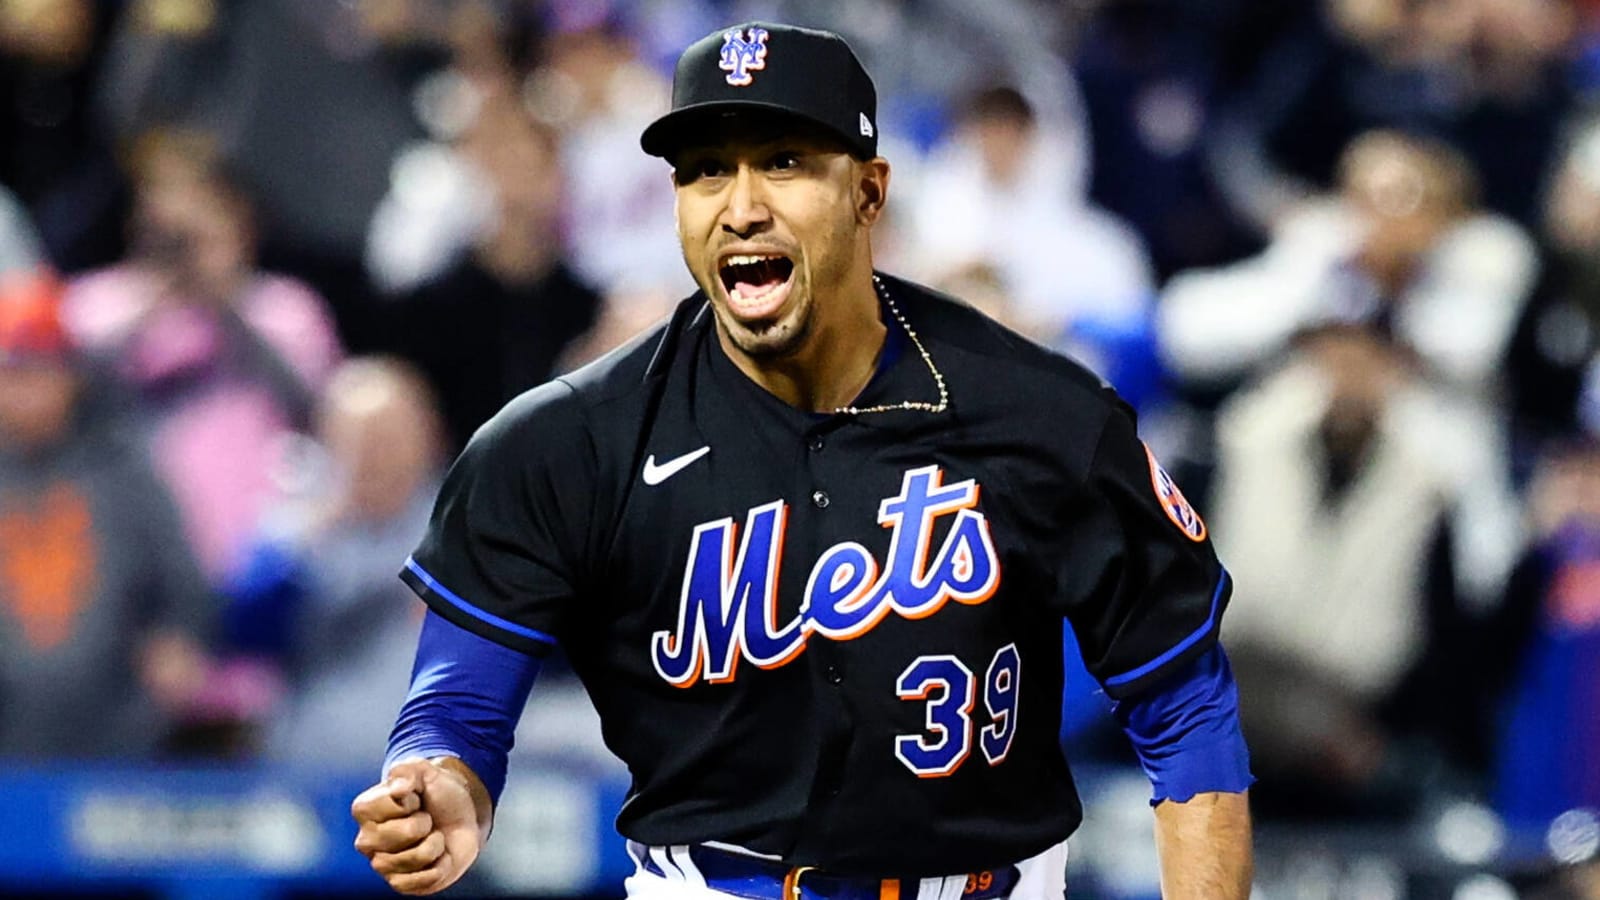 New York Mets inexplicably going to the extreme with Edwin Diaz